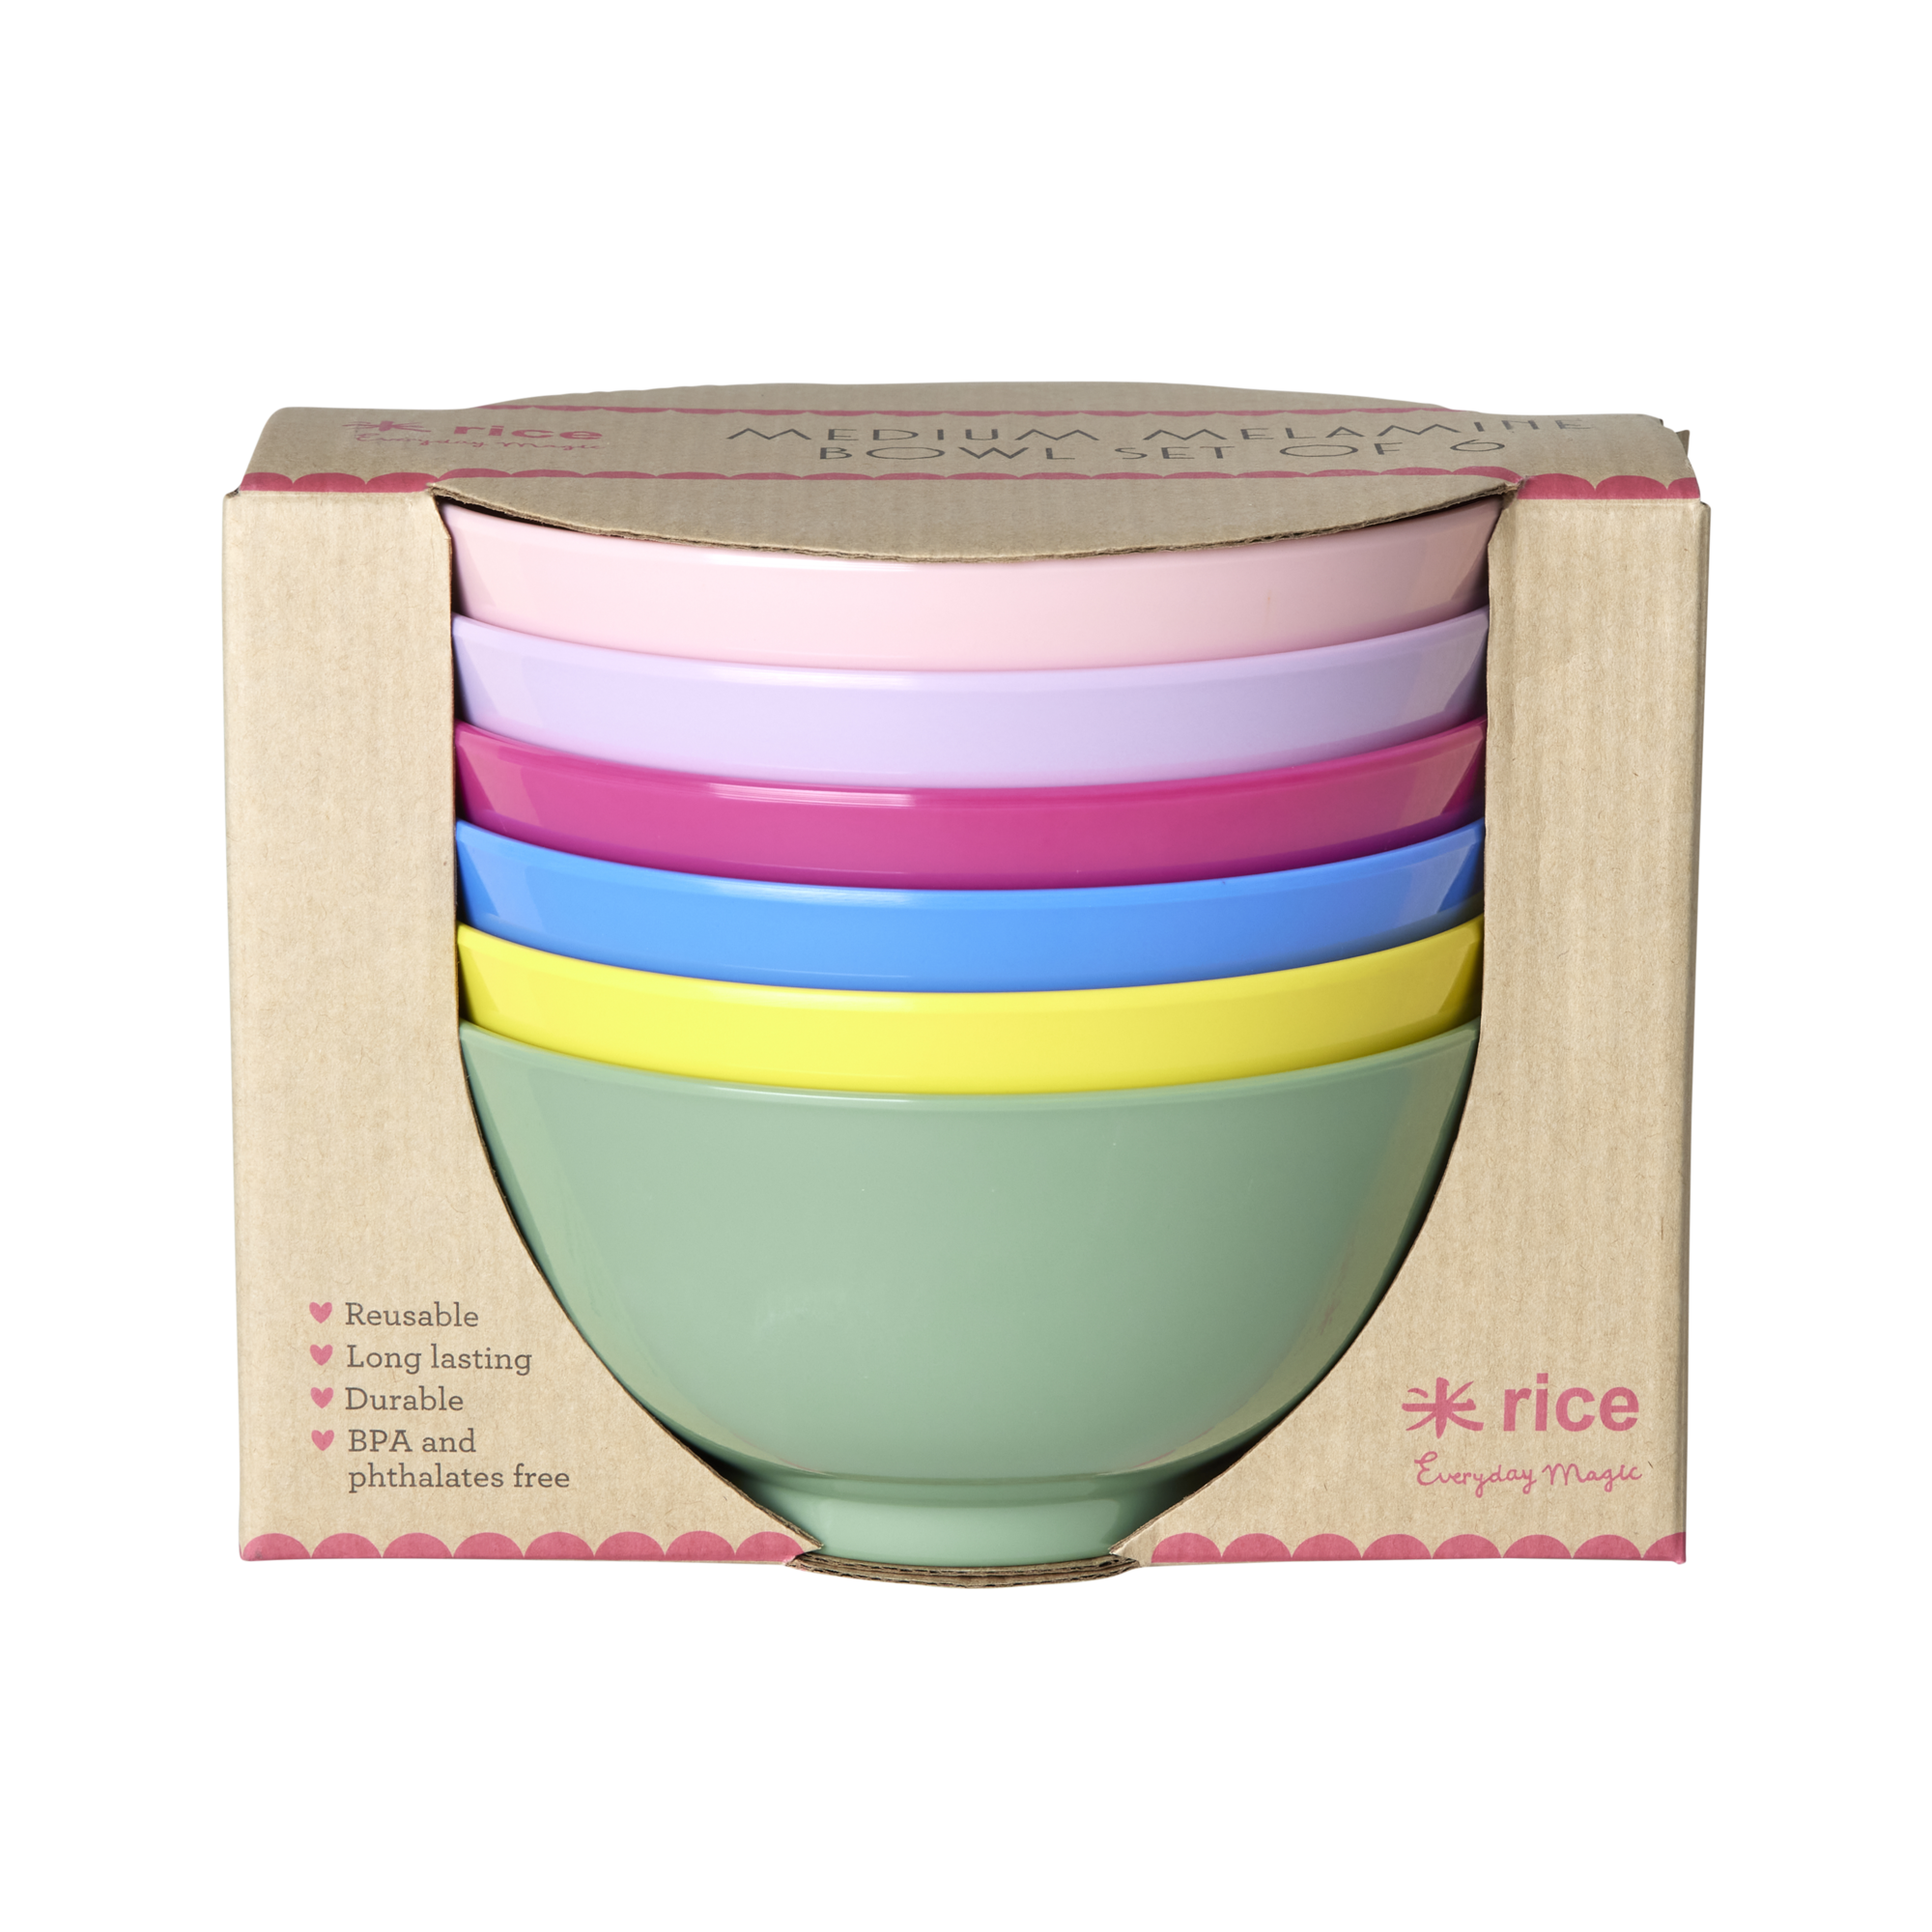 Melamine bowls by Rice by Rice in the colors rose, violet, pink, light blue, yellow, mint